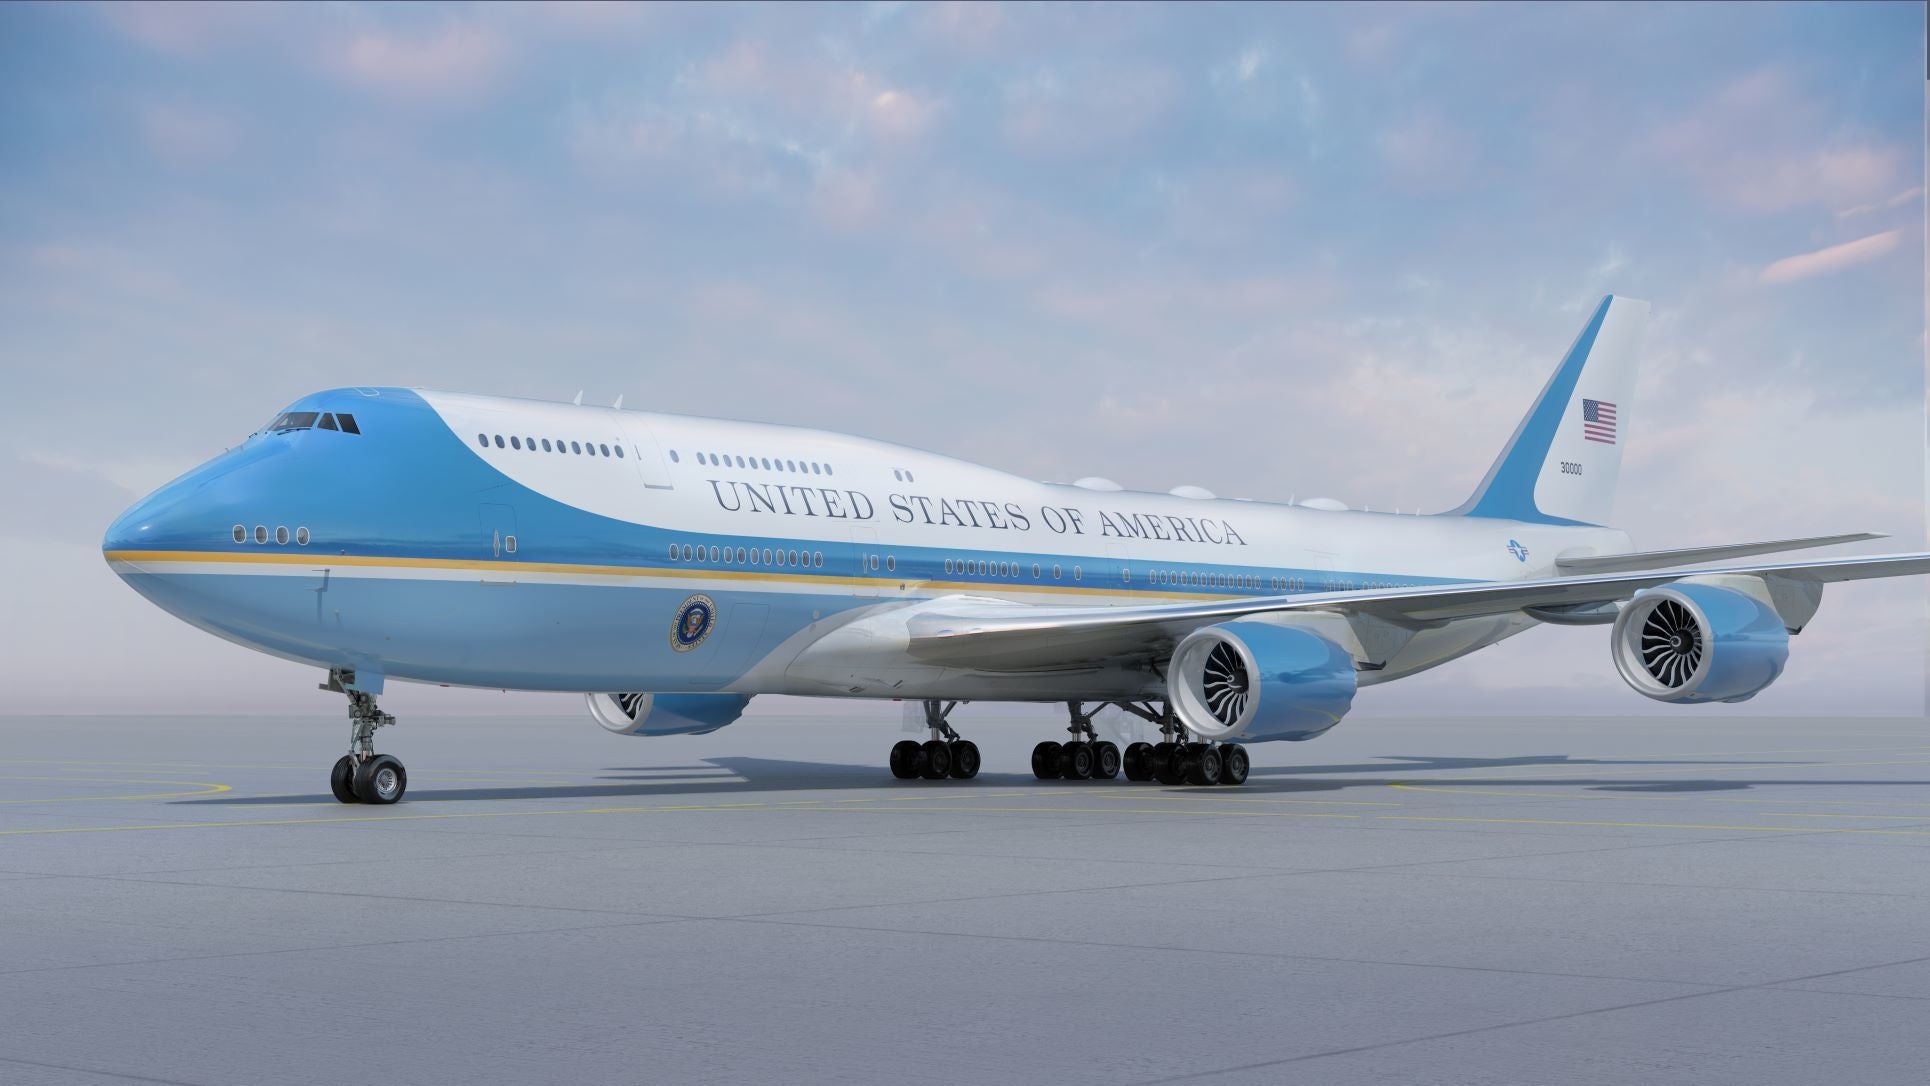 The President of the United States selected the livery design for the “Next Air Force One,” VC-25B, a design that will closely resemble the livery of the current Air Force One, VC-25A, while also modernizing for the 21st century. (Courtesy rendering)